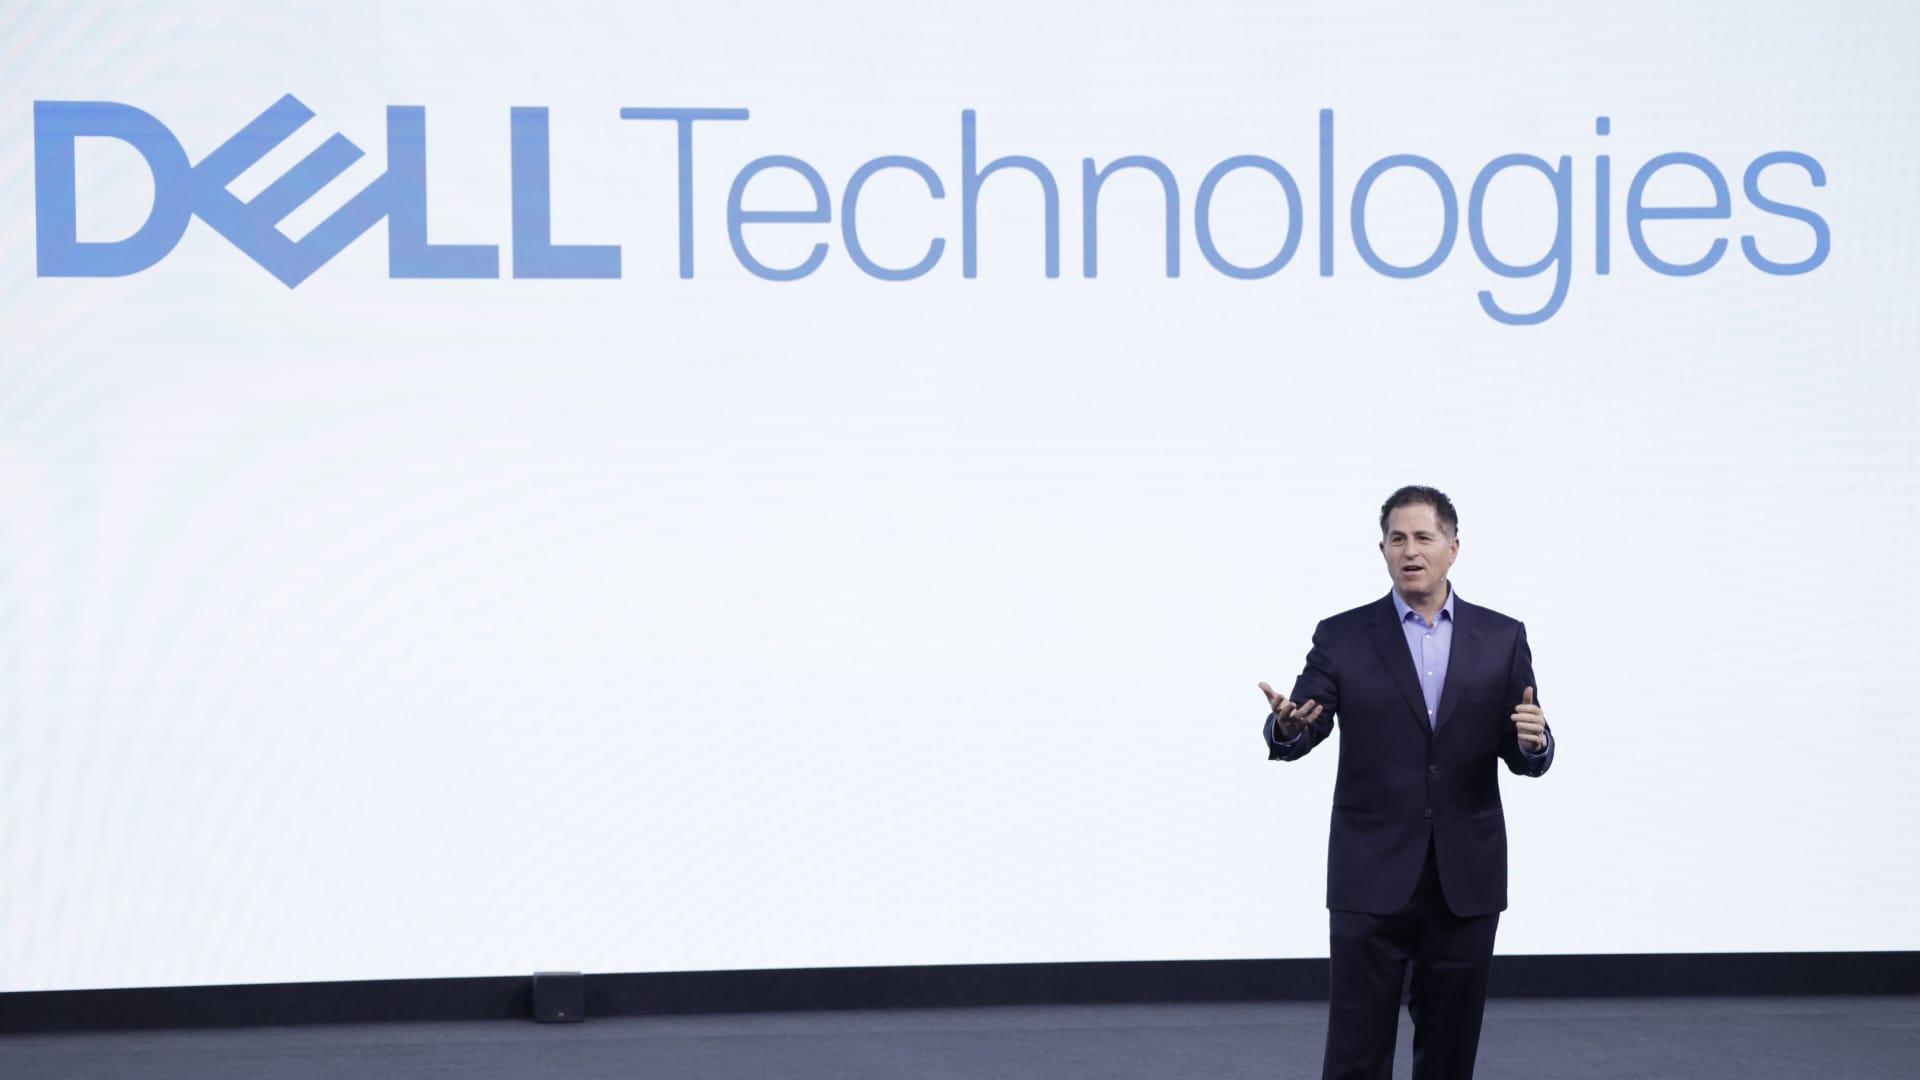 Dell shares tumble after first quarter earnings report